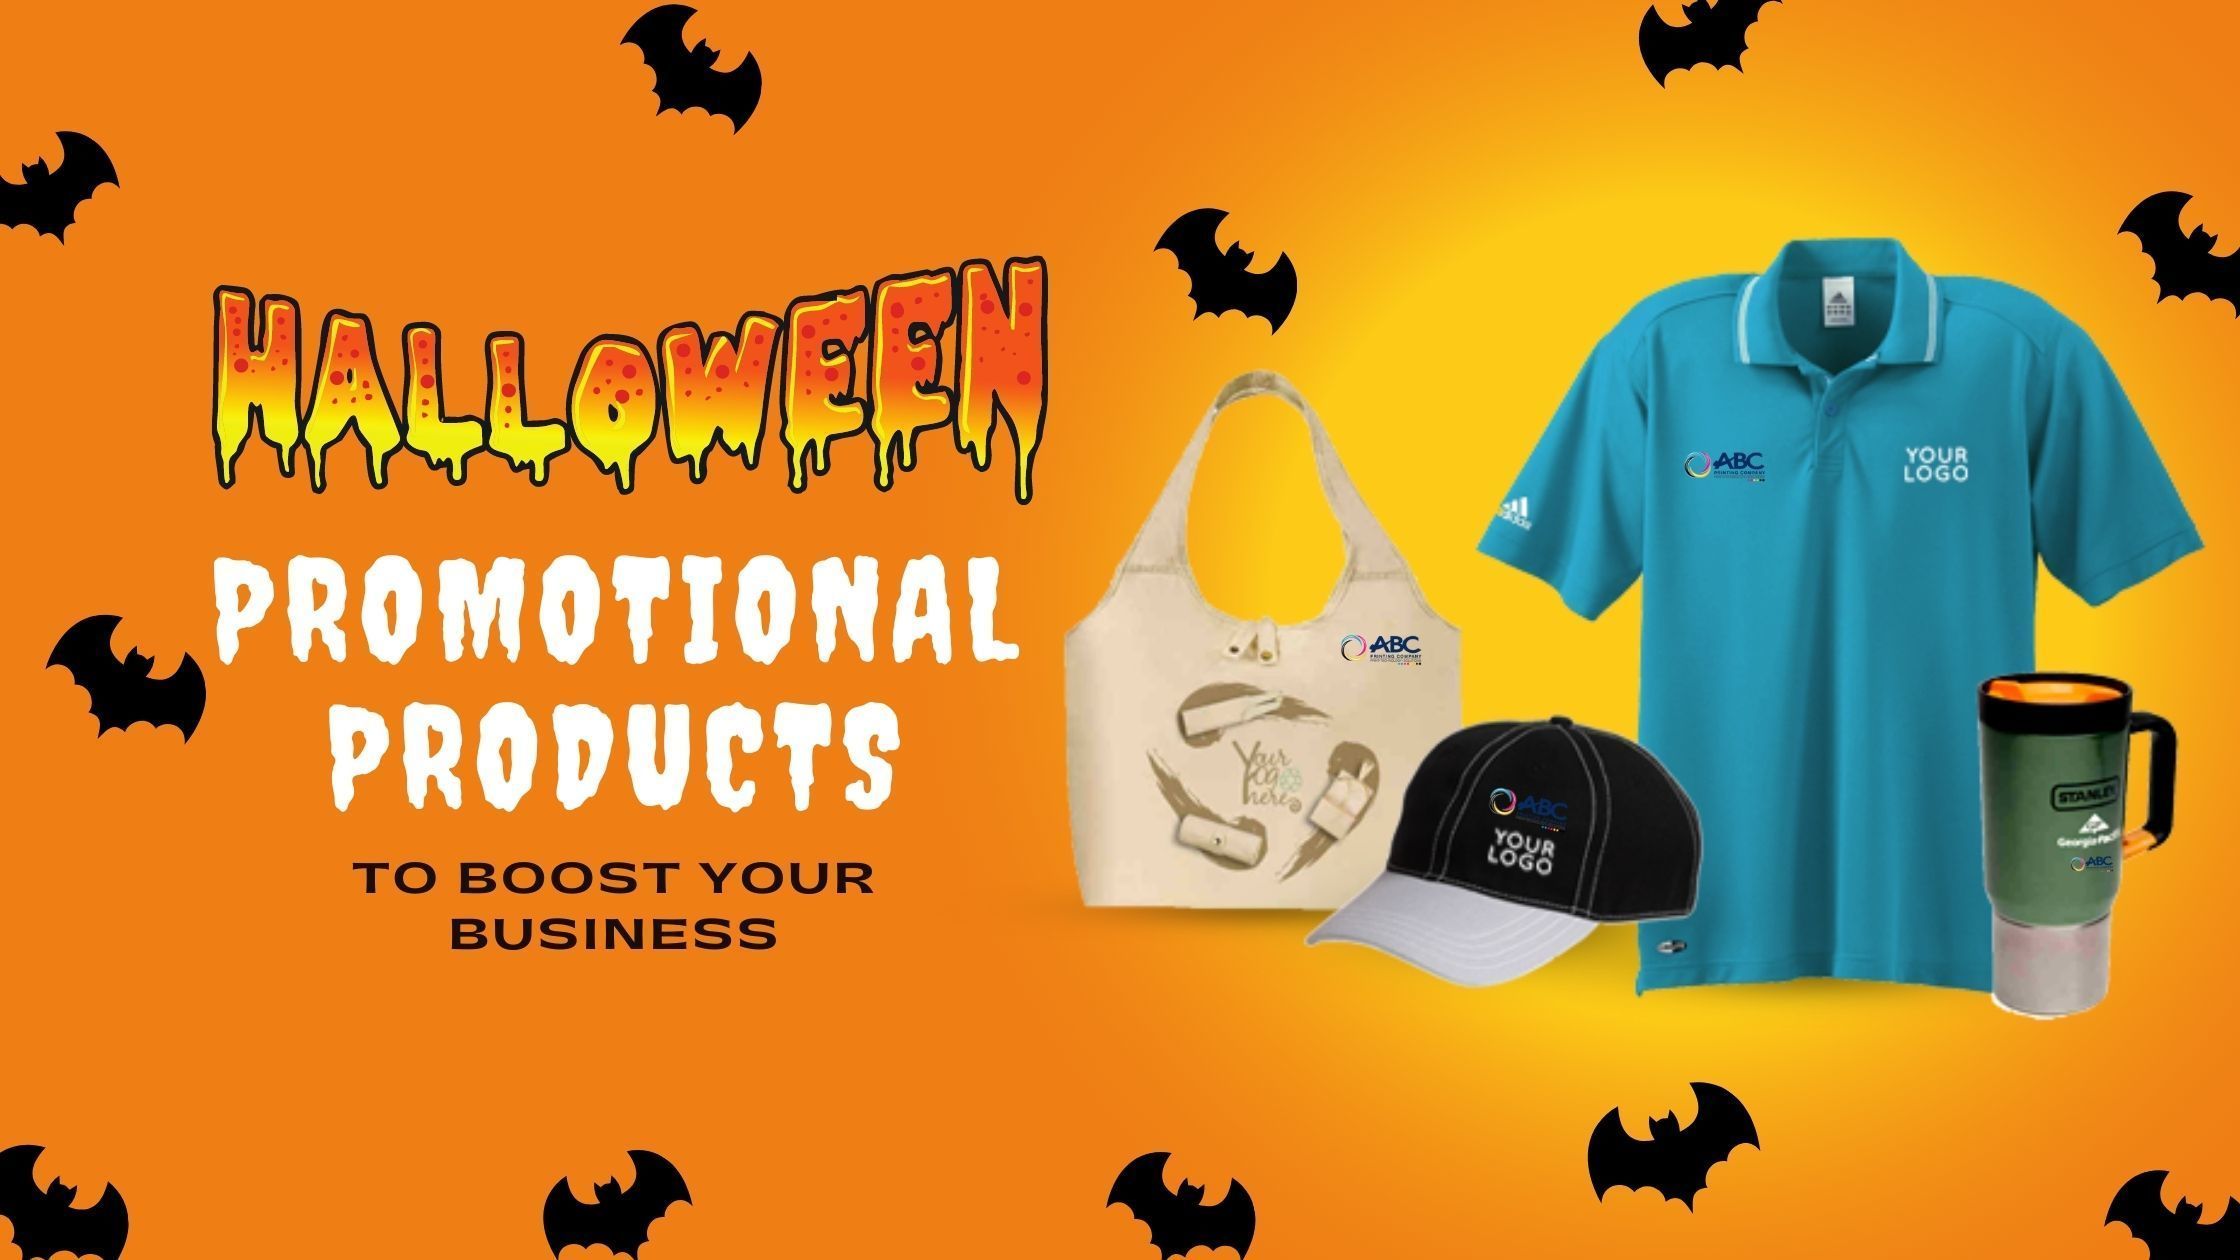 10 Promotional Products For Halloween To Boost Your Business